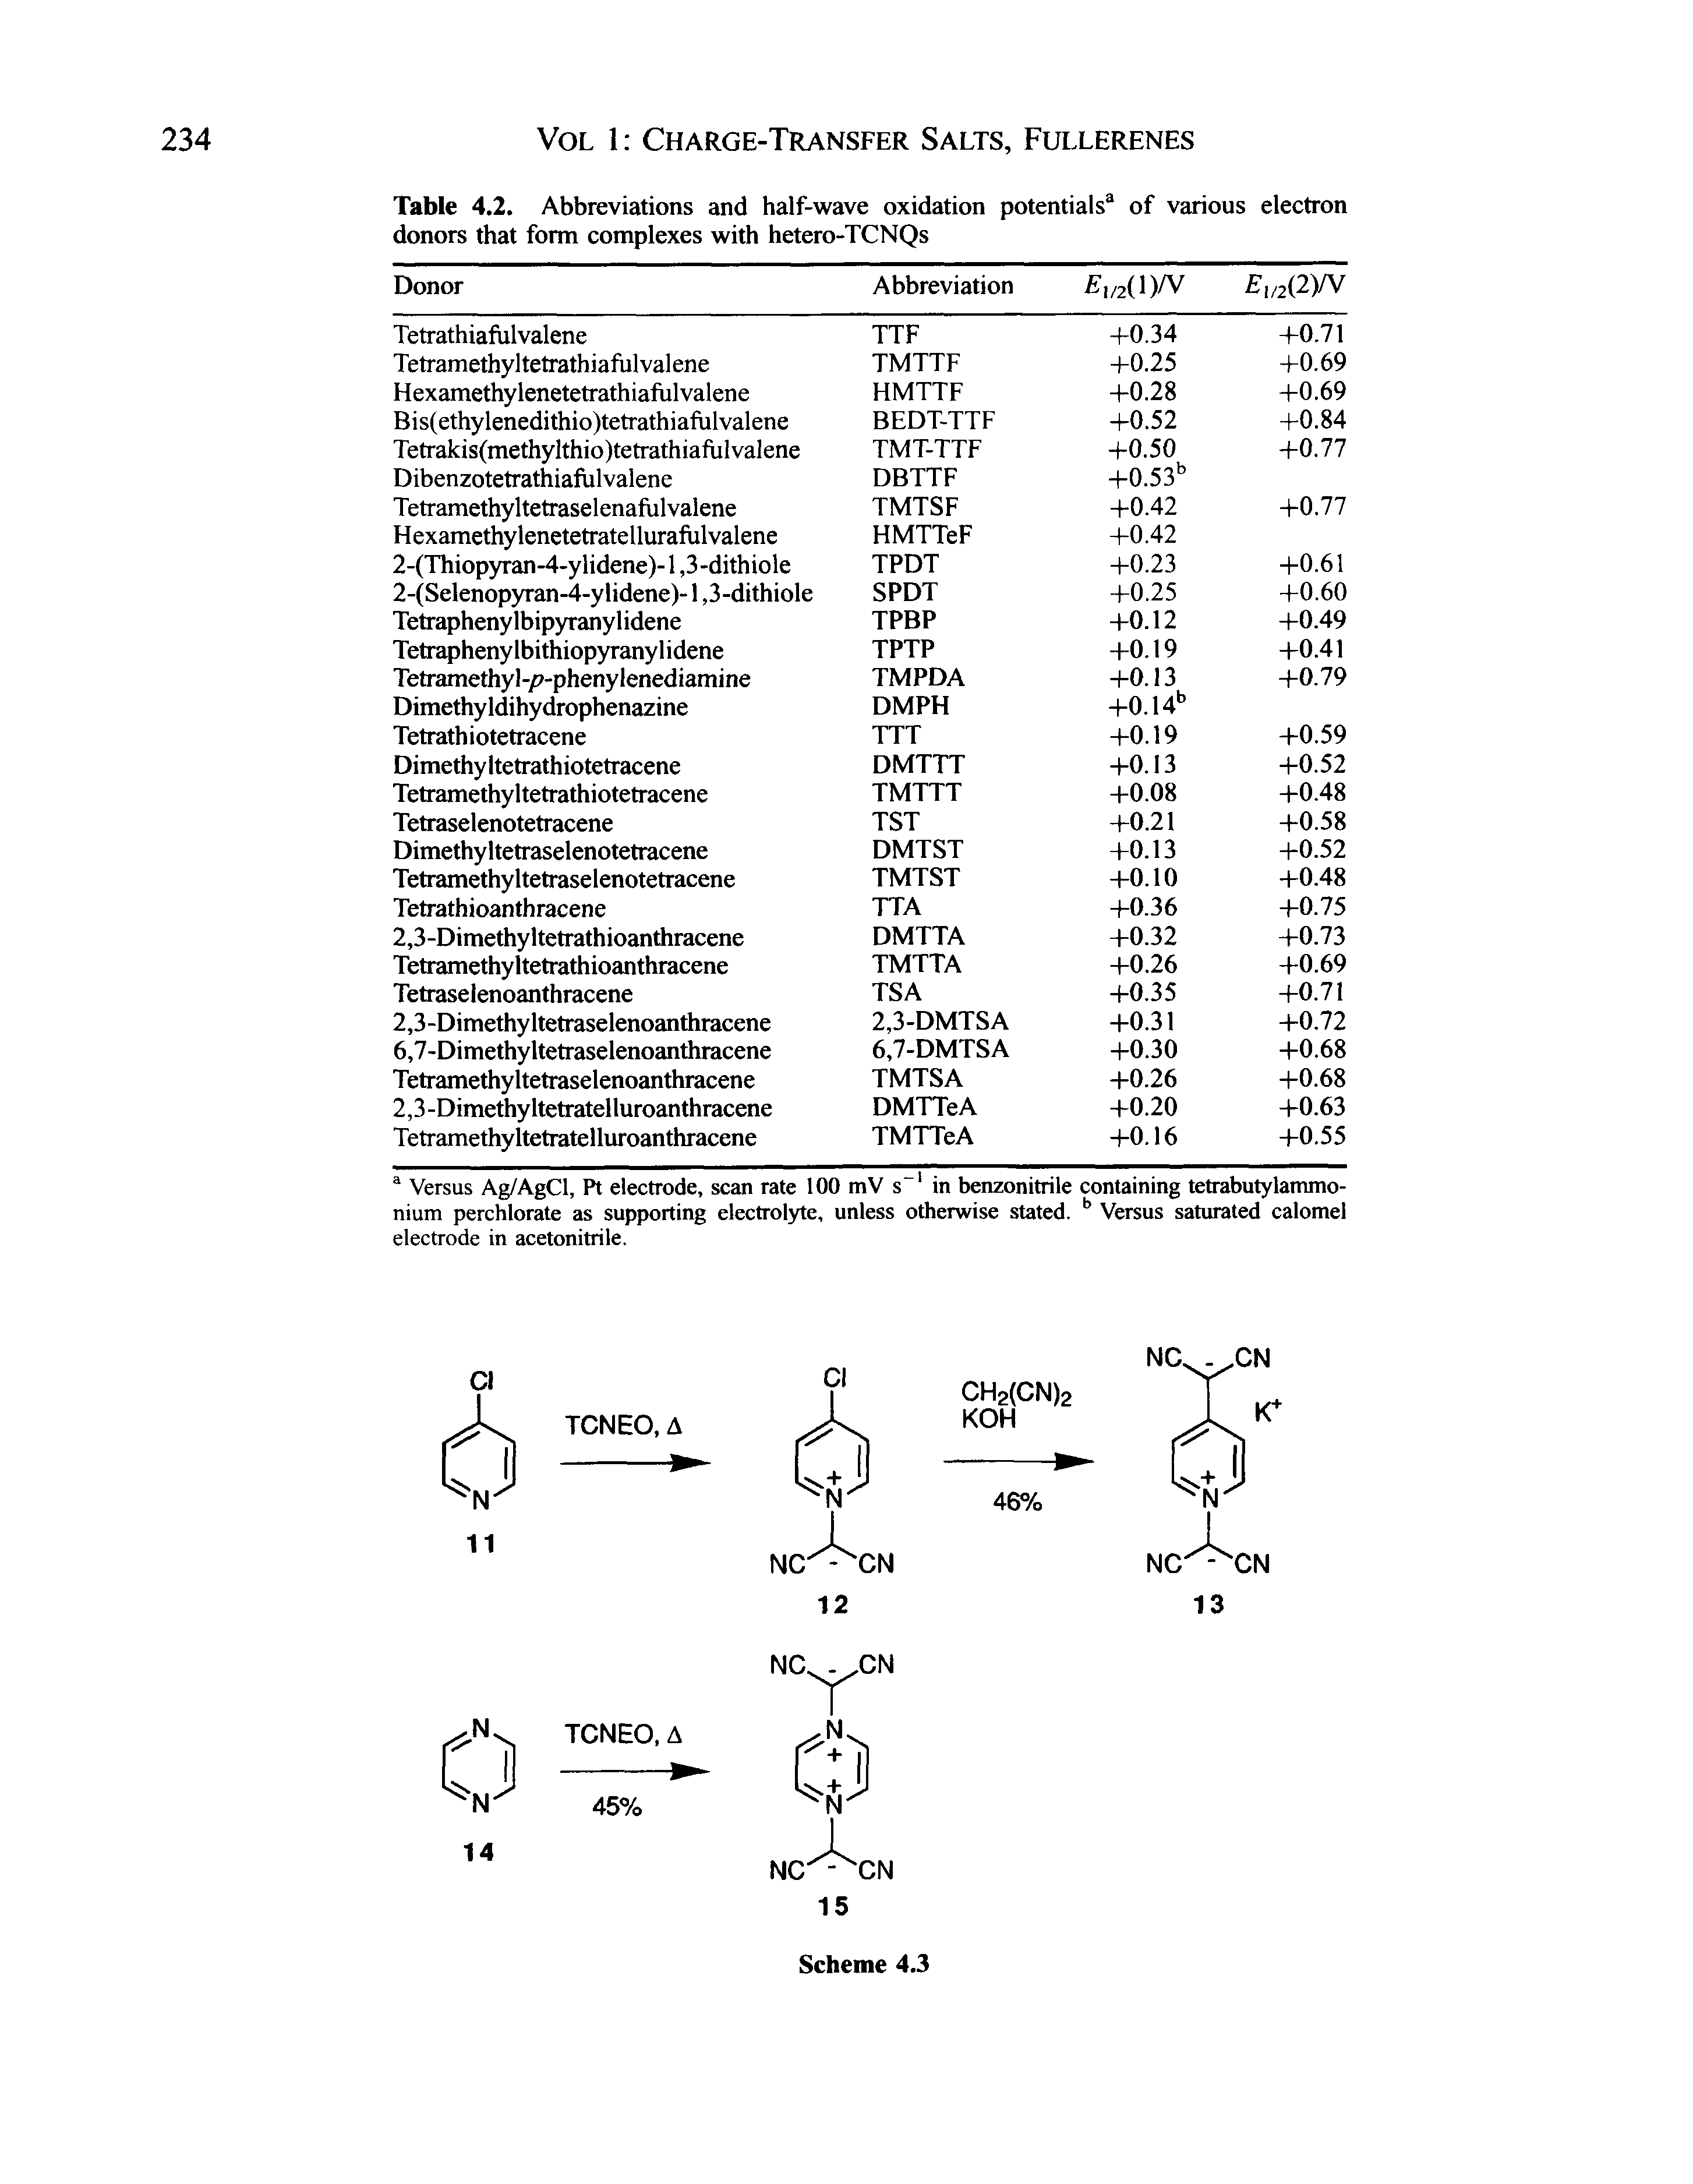 Table 4.2. Abbreviations and half-wave oxidation potentials of various electron donors that form complexes with hetero-TCNQs...